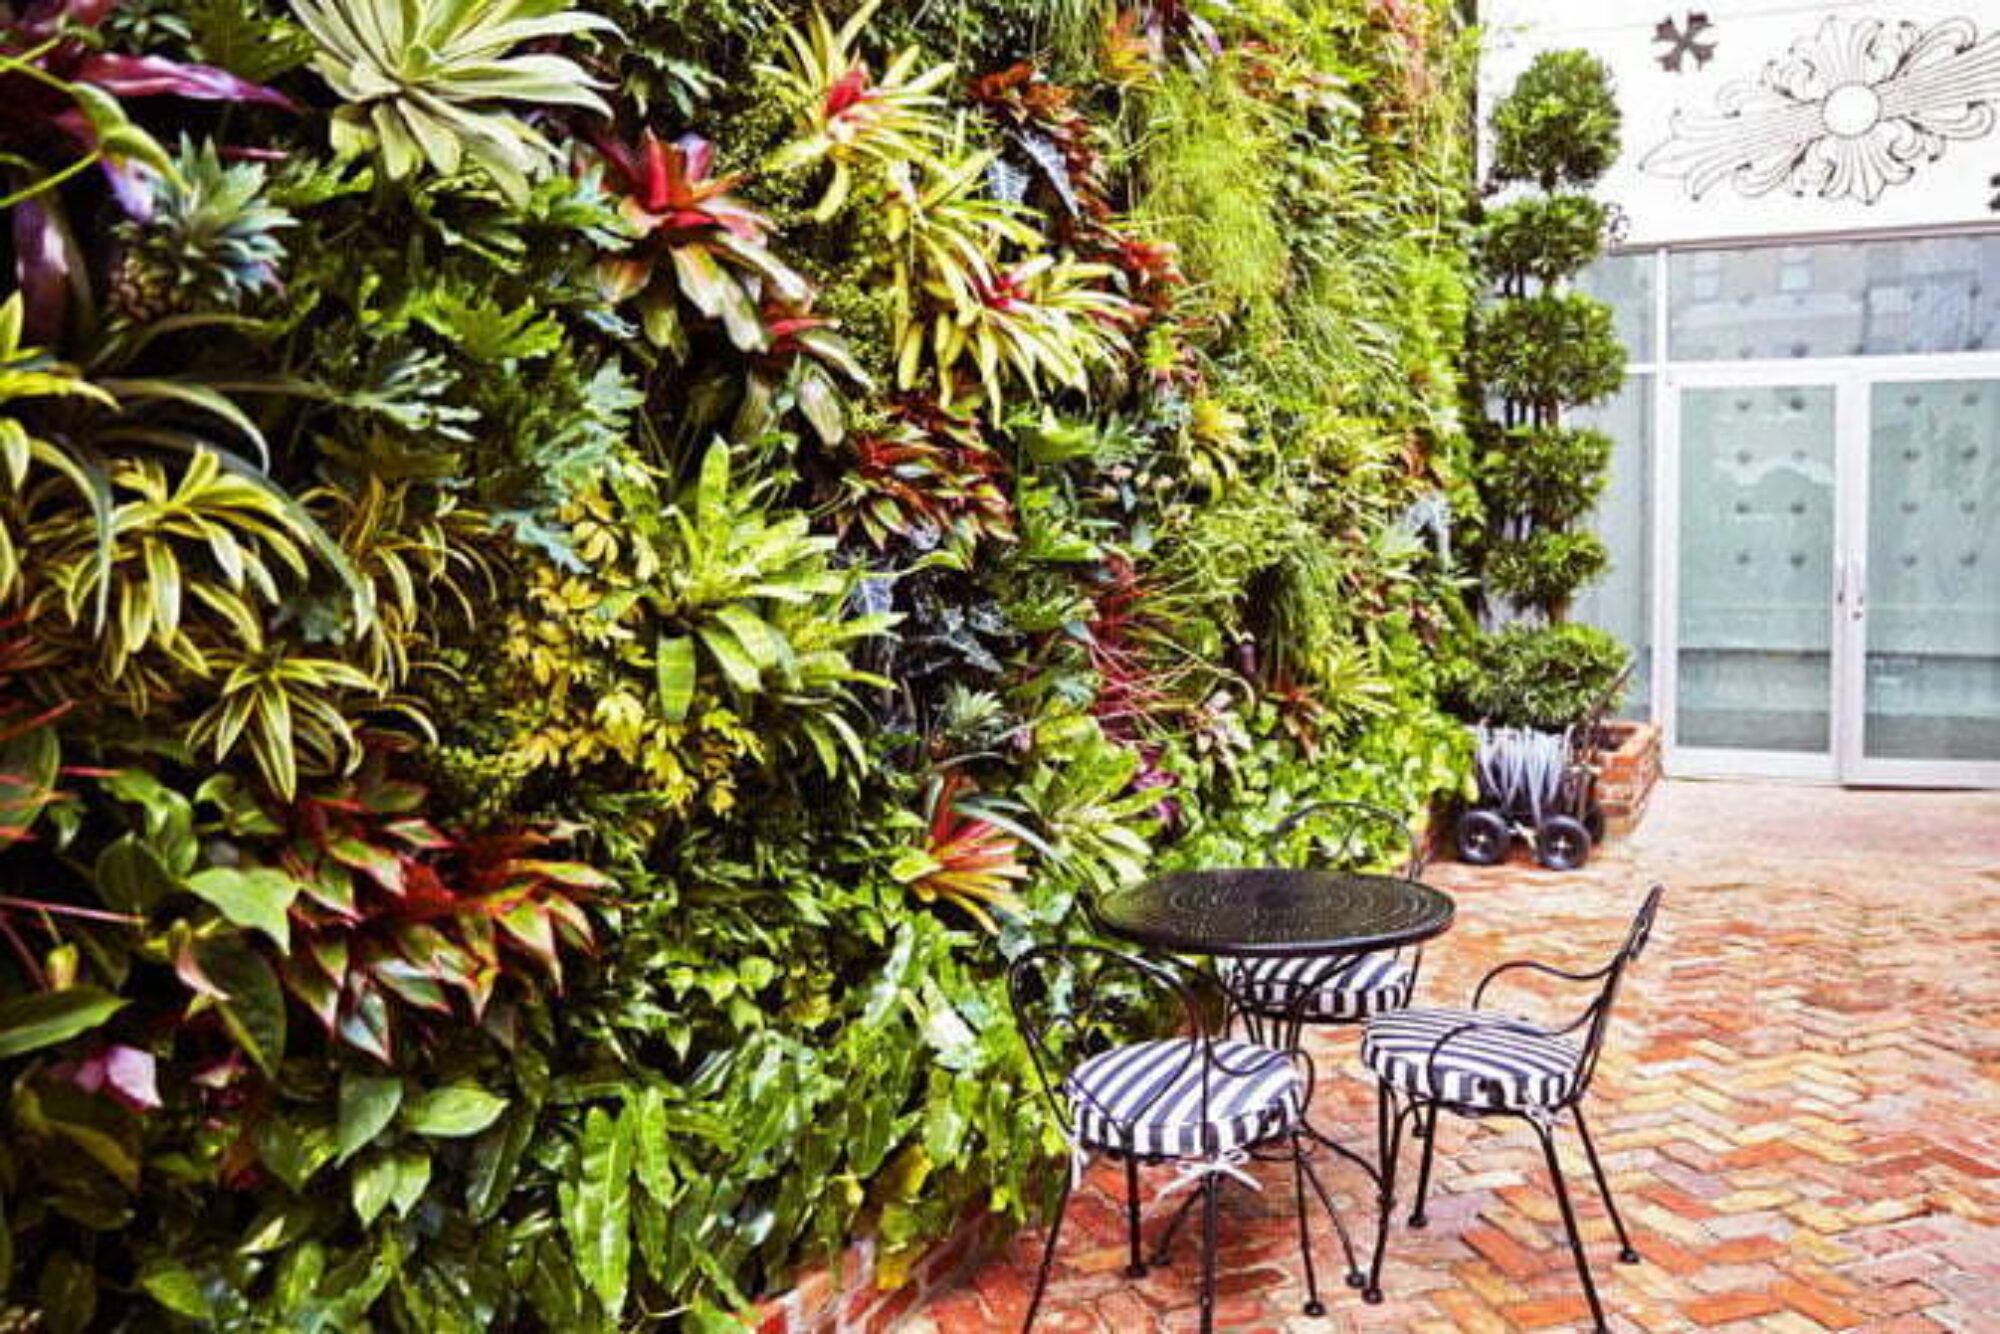 Outdoor Living In An Apartment: 3 Tips To Make The Most of Your Outdoor Space